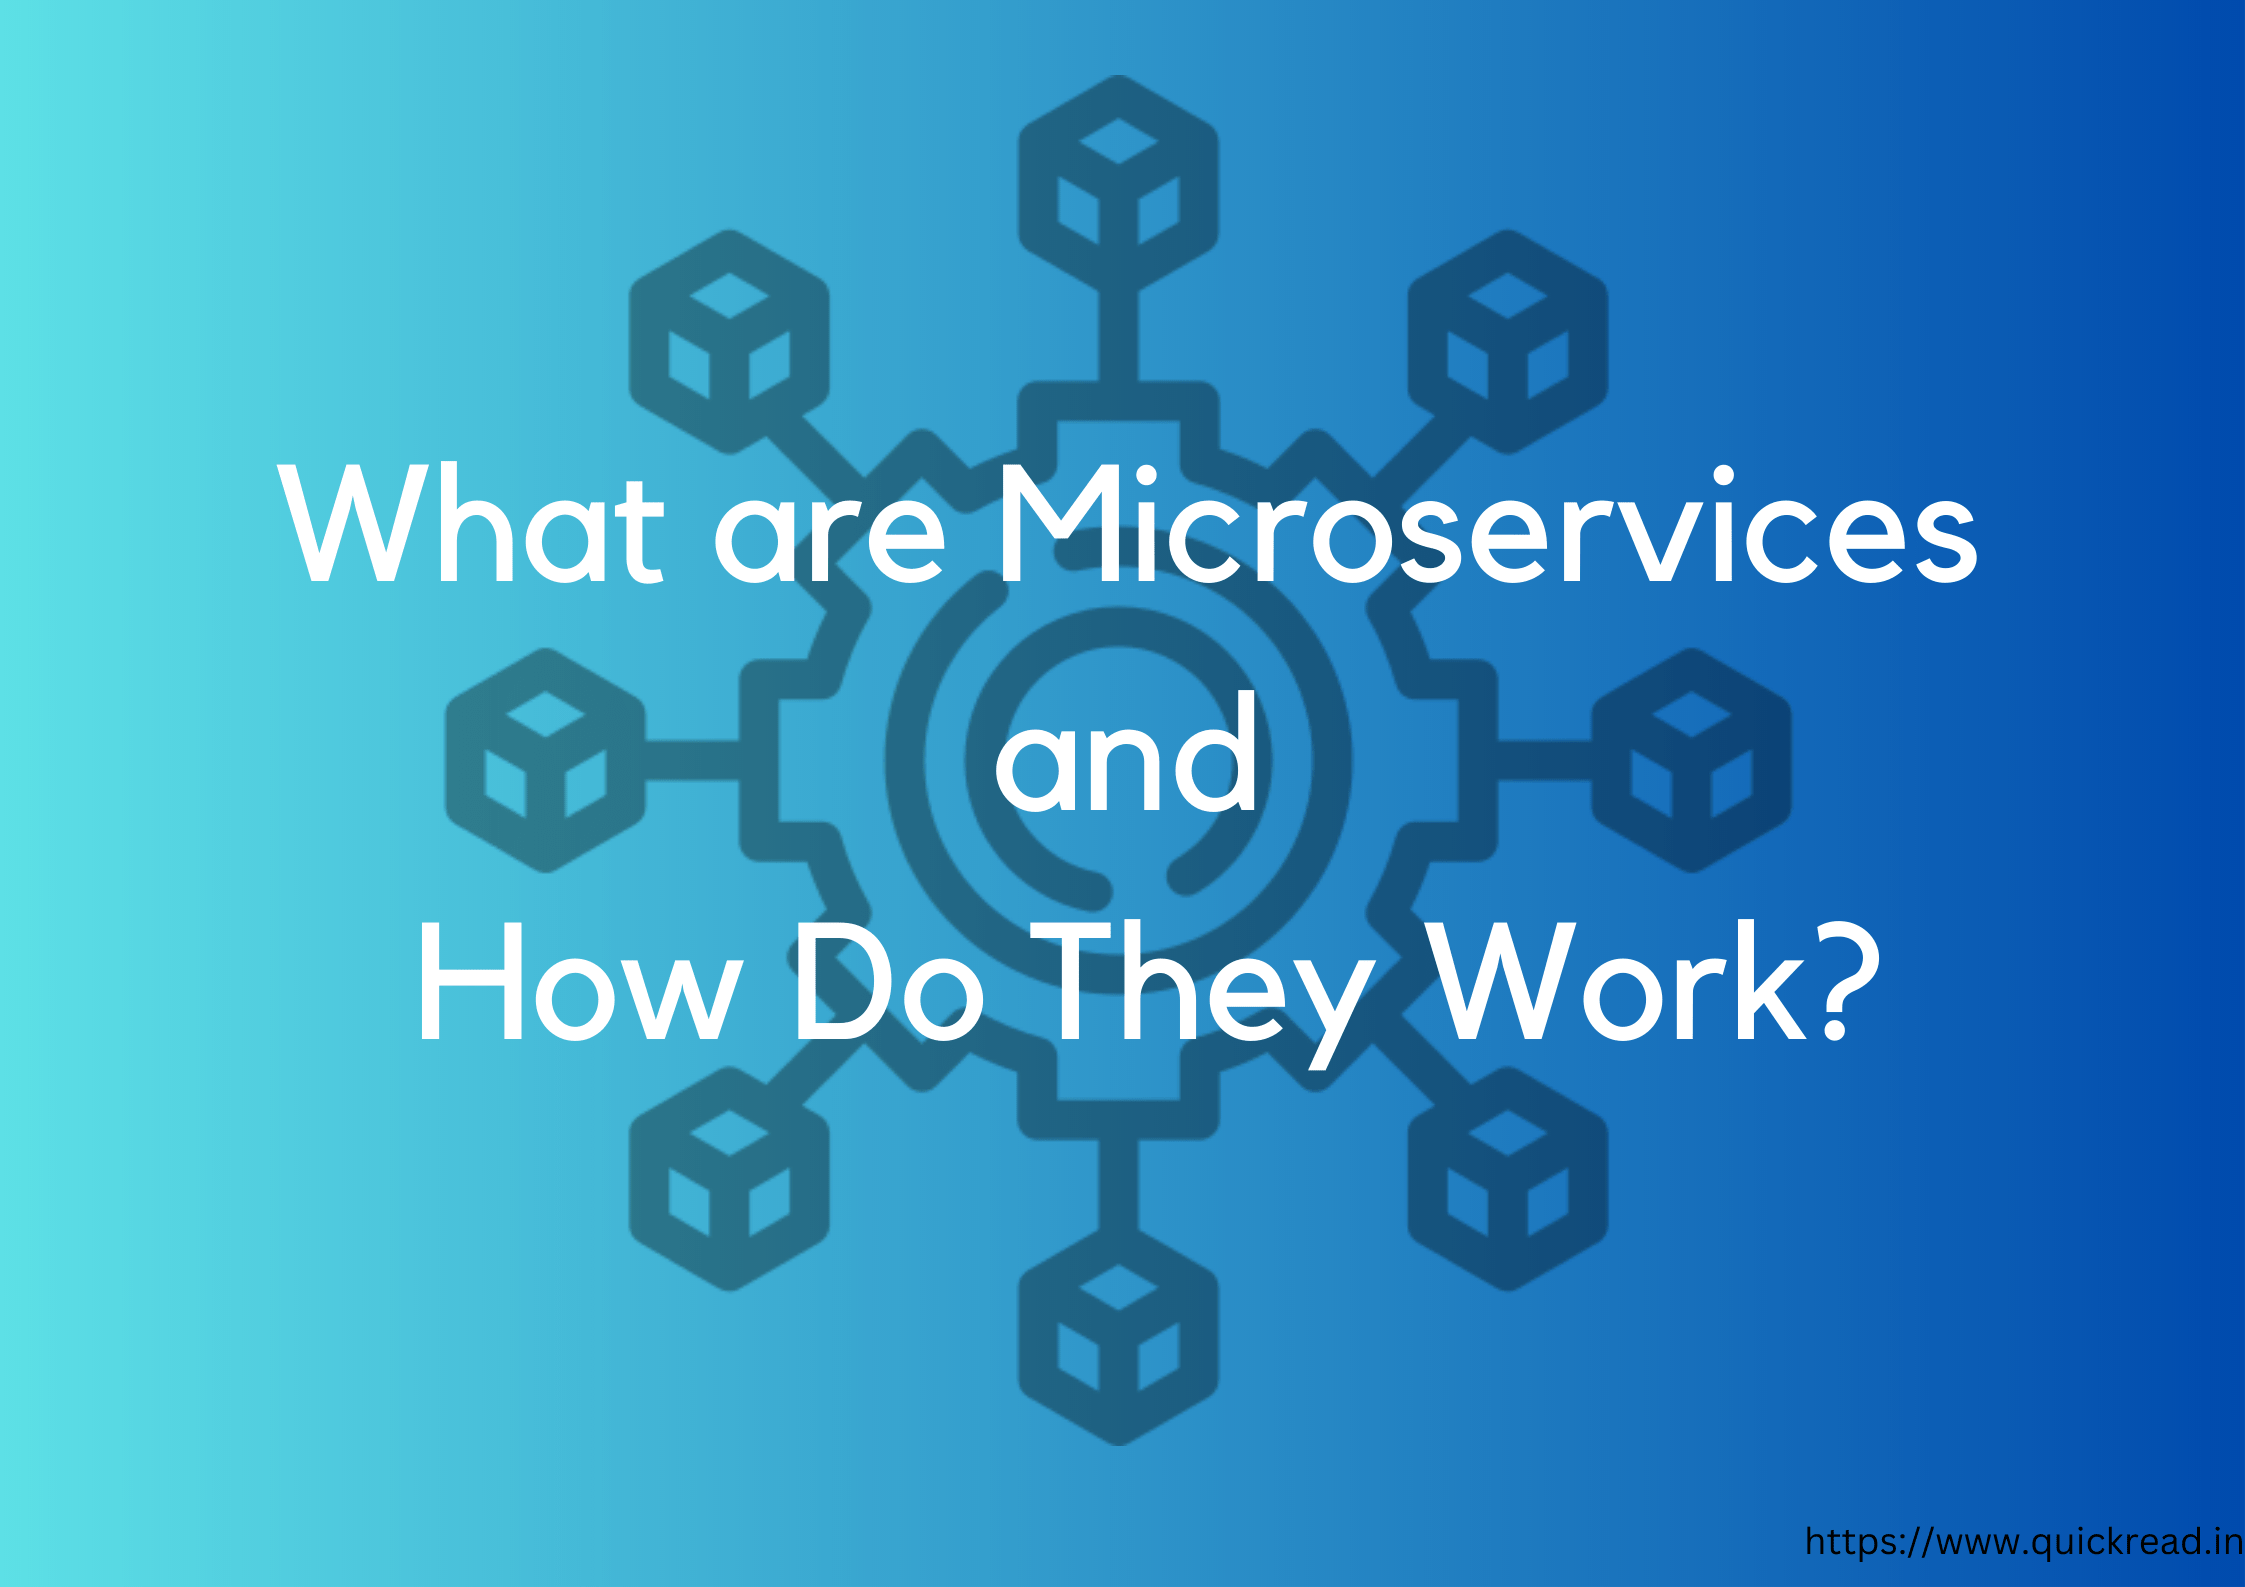 What are Microservices and How Do They Work